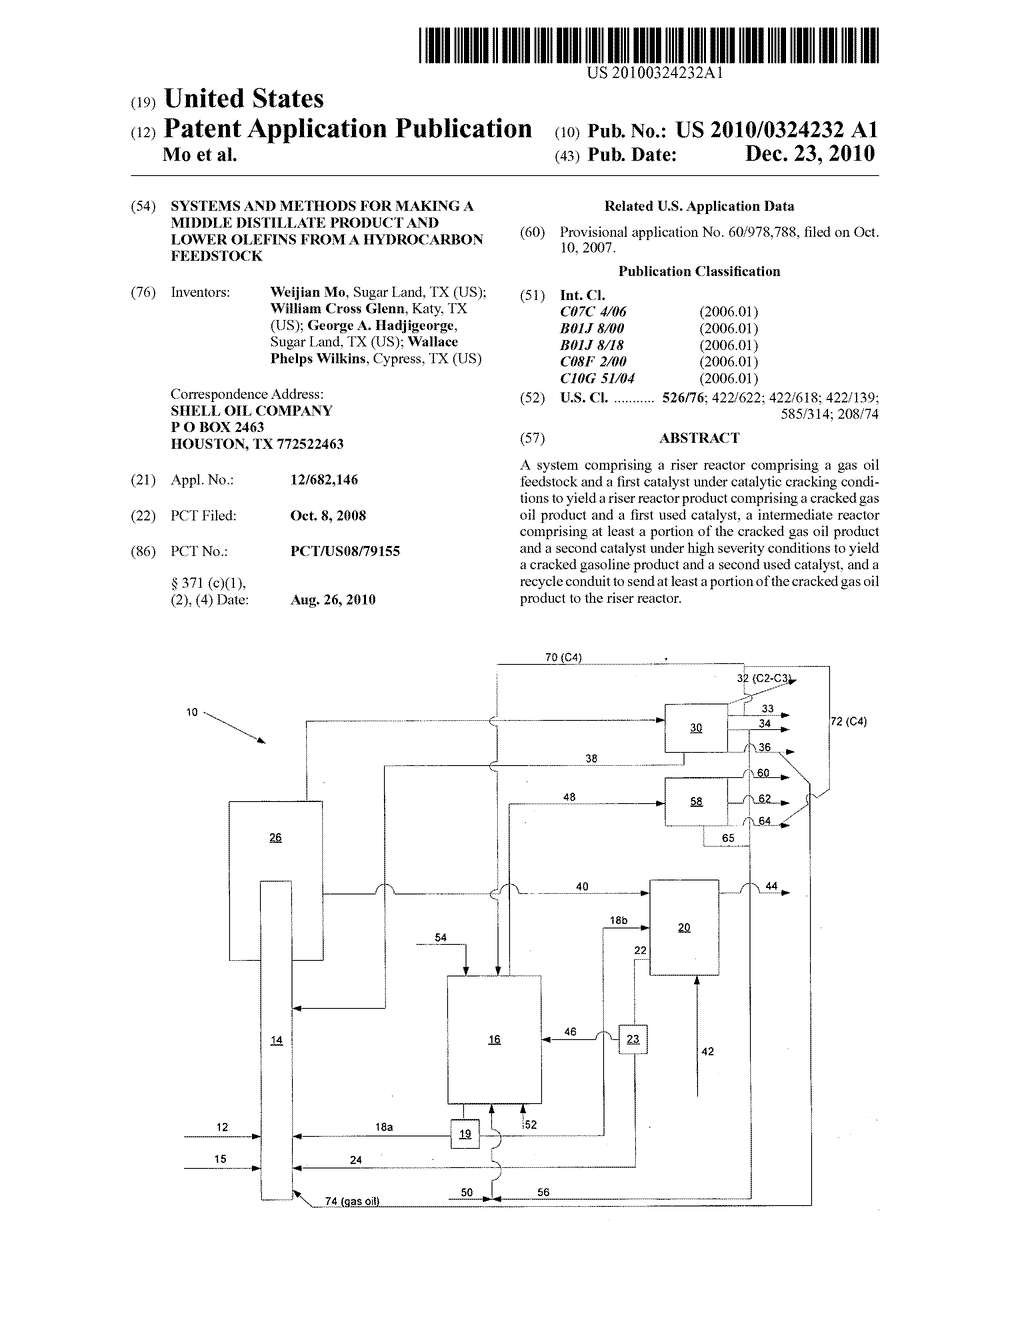 SYSTEMS AND METHODS FOR MAKING A MIDDLE DISTILLATE PRODUCT AND LOWER OLEFINS FROM A HYDROCARBON FEEDSTOCK - diagram, schematic, and image 01